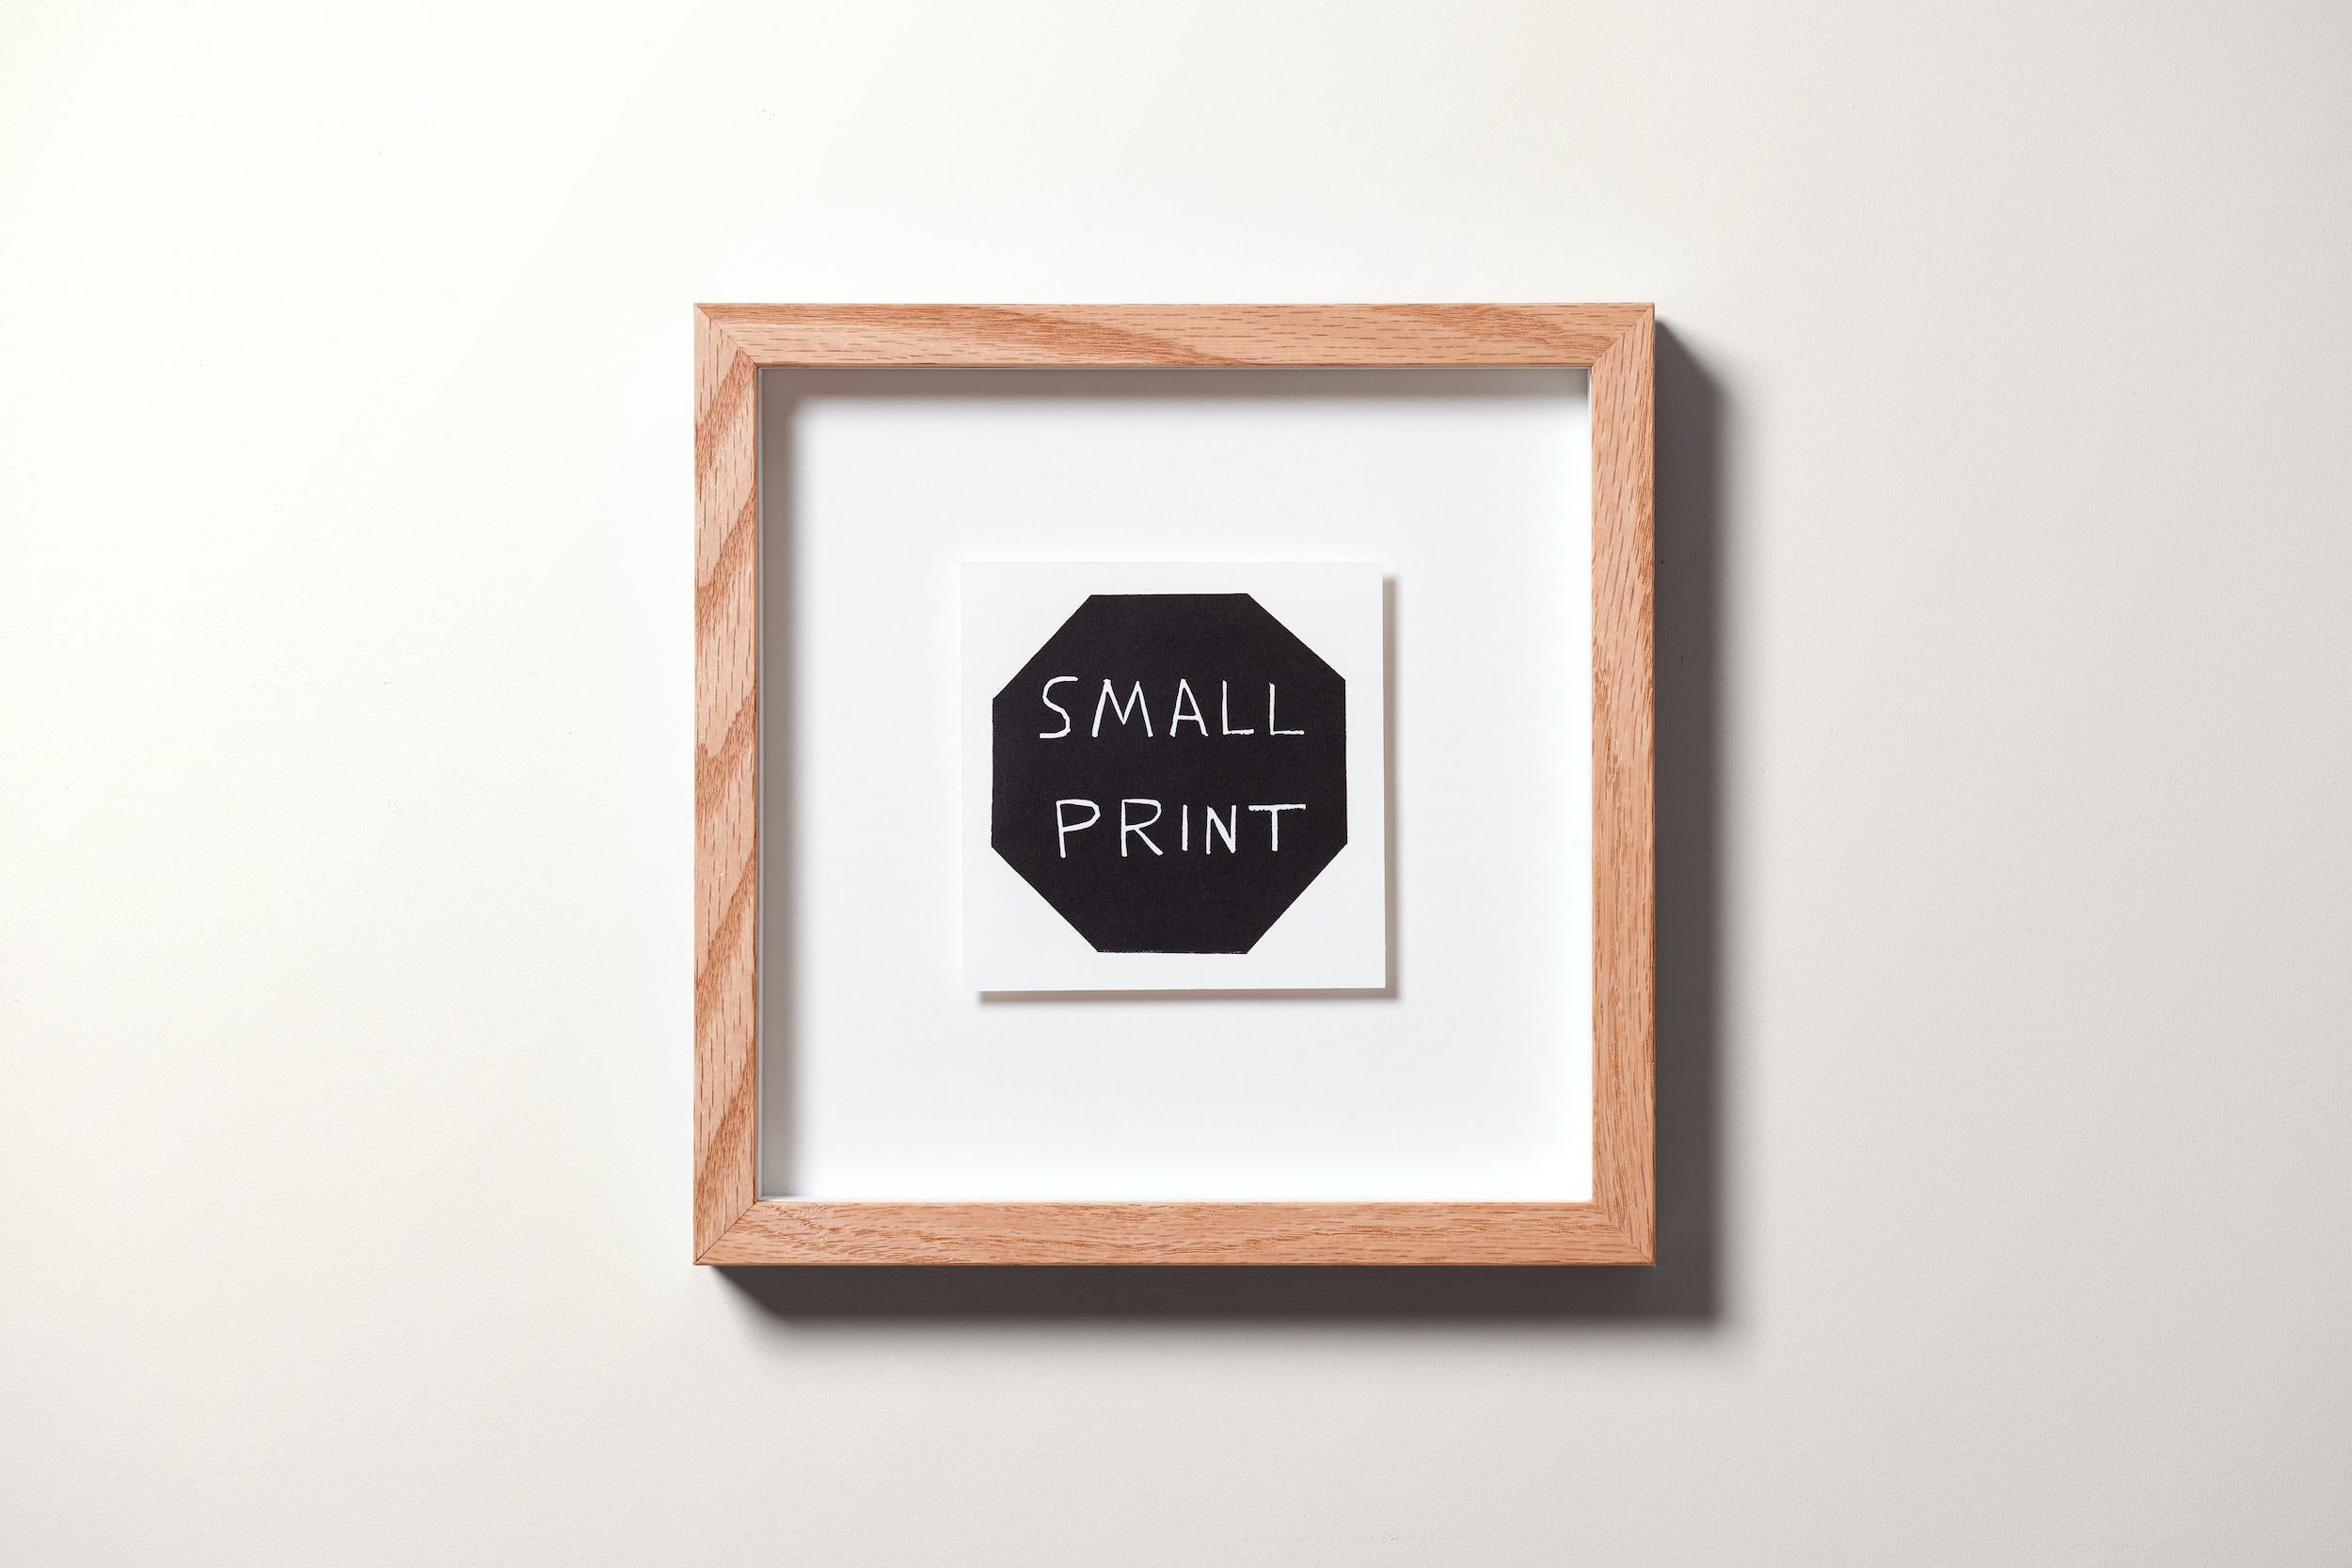 Small Print, 2023
David Shrigley

Linocut, on Somerset wove
Signed and numbered from the edition of 100
Sheet: 10.5 × 10.5 cm (4.1 × 4.1 in)
Within a handmade oak frame with UV filtered glass	
Frame: 23 x 23 cm (9 x 9 in)